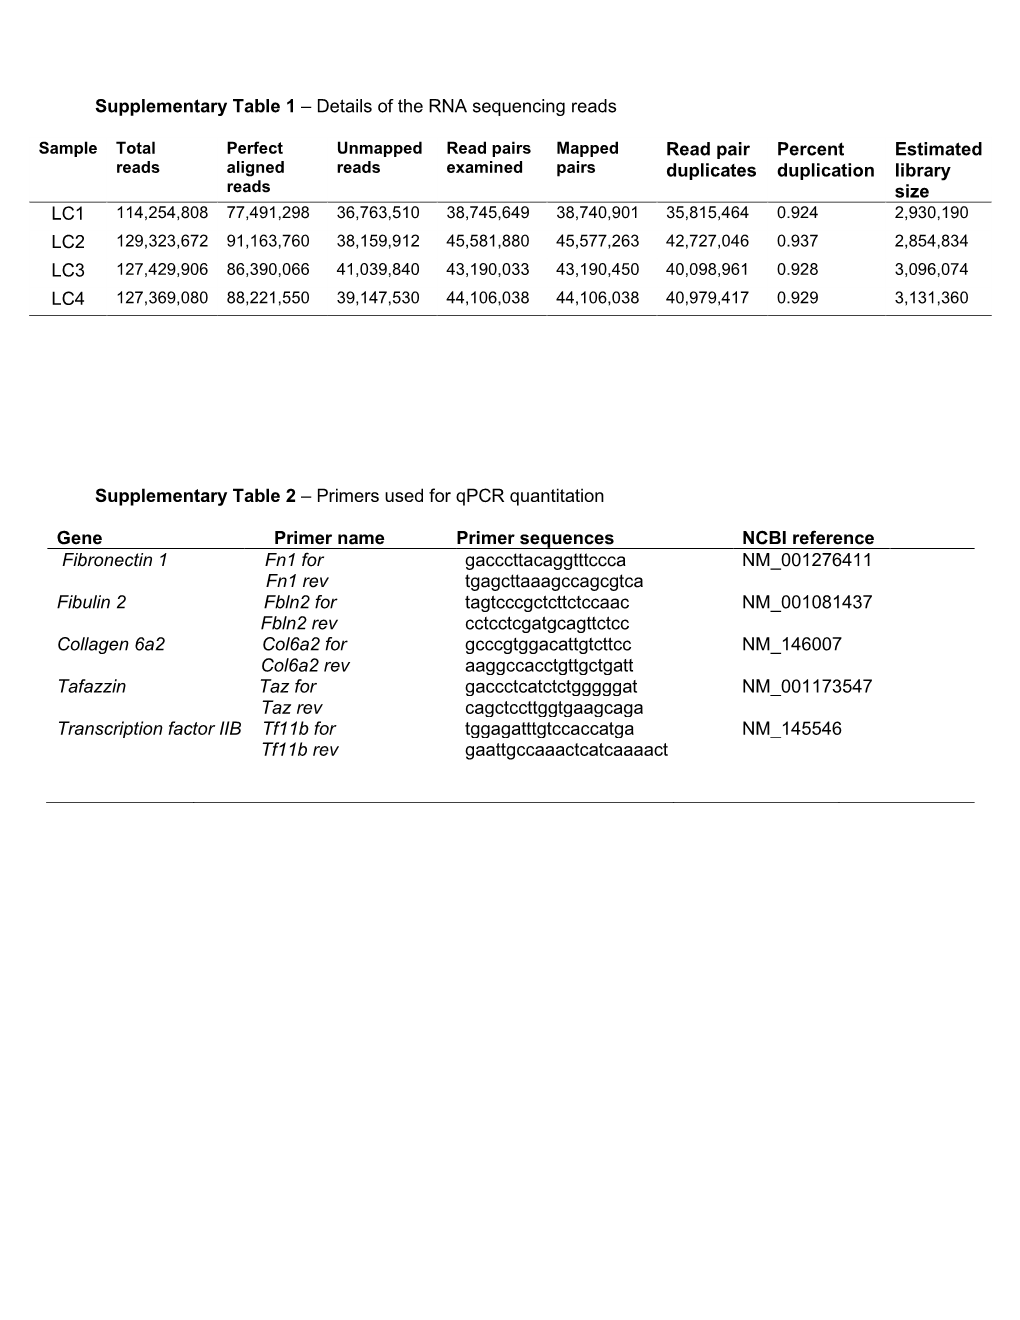 Supplementary Table 1 – Details of the RNA Sequencing Reads